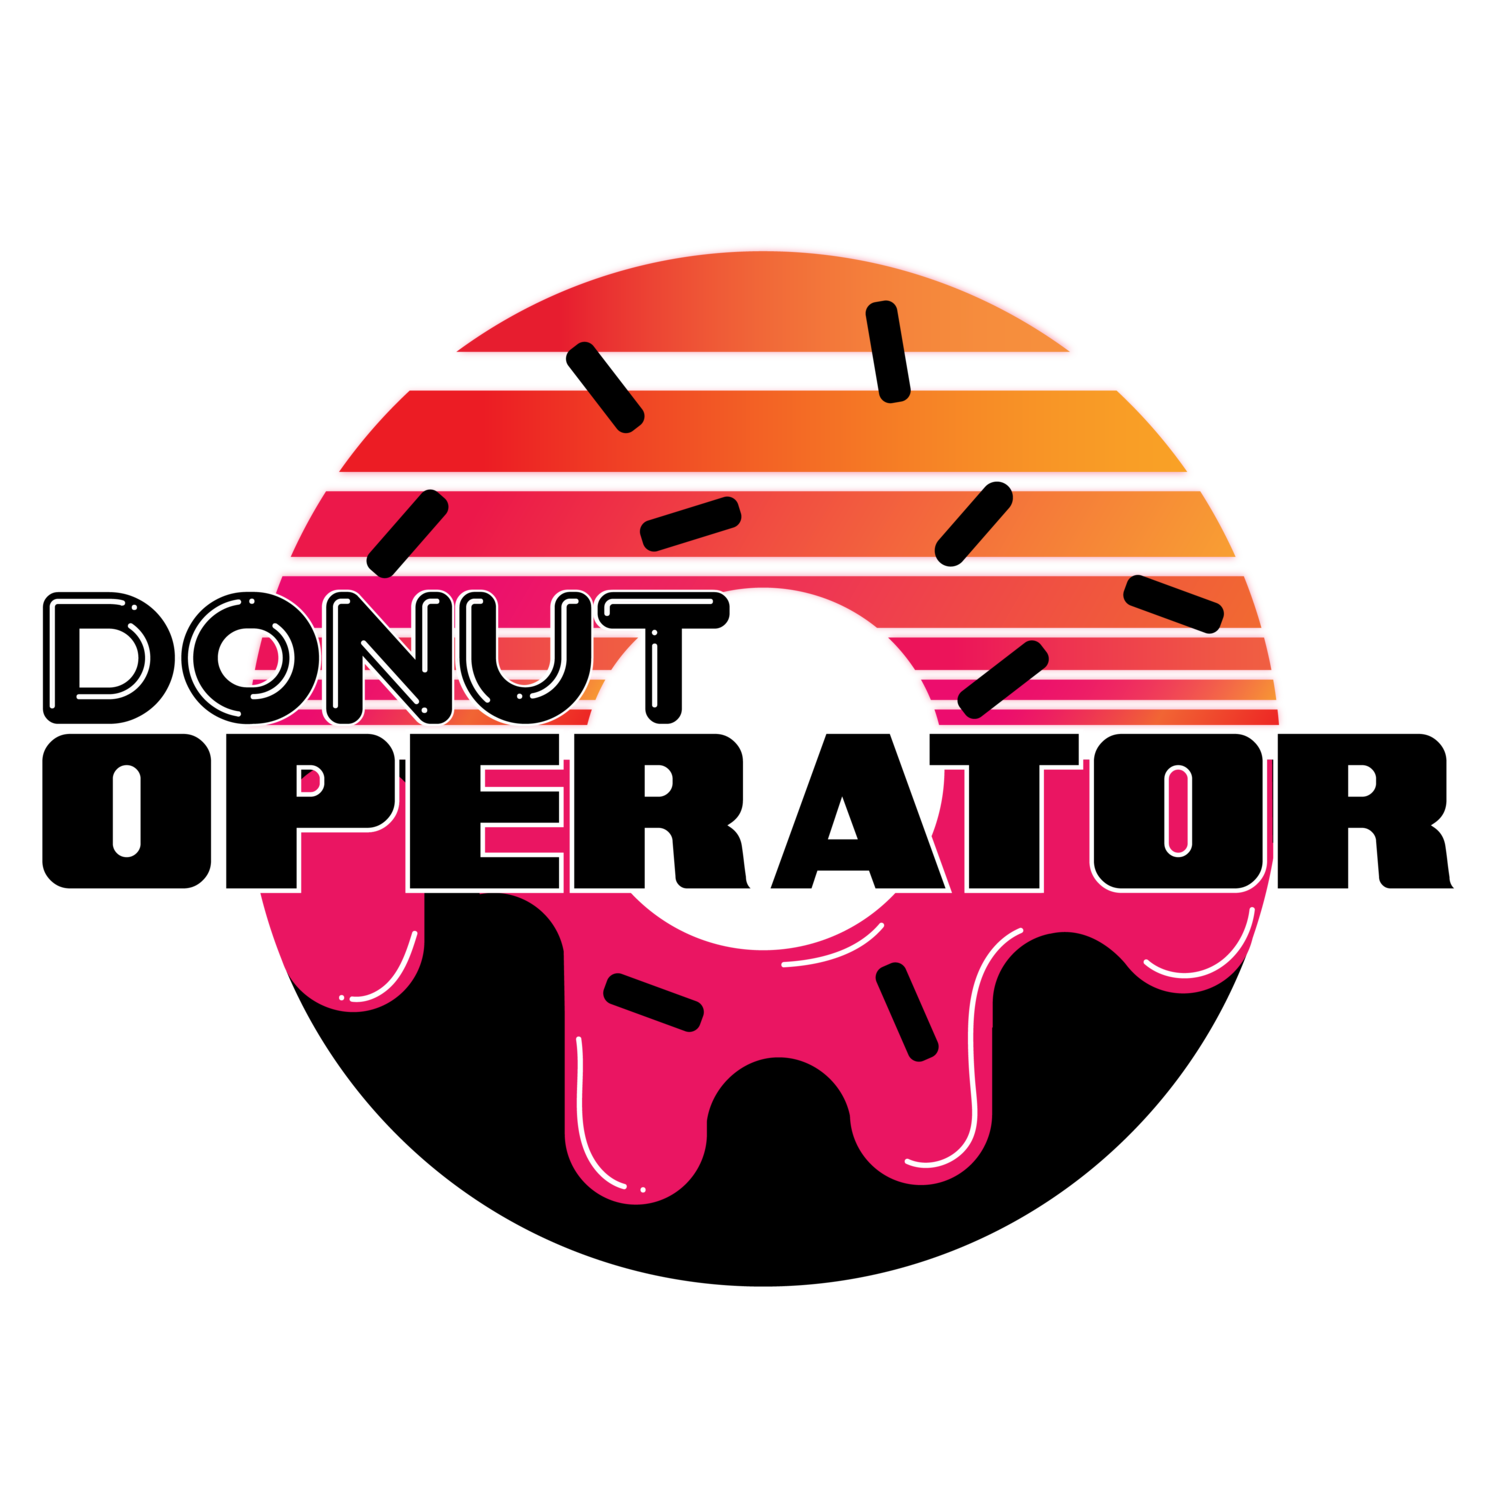 How old is donut operator